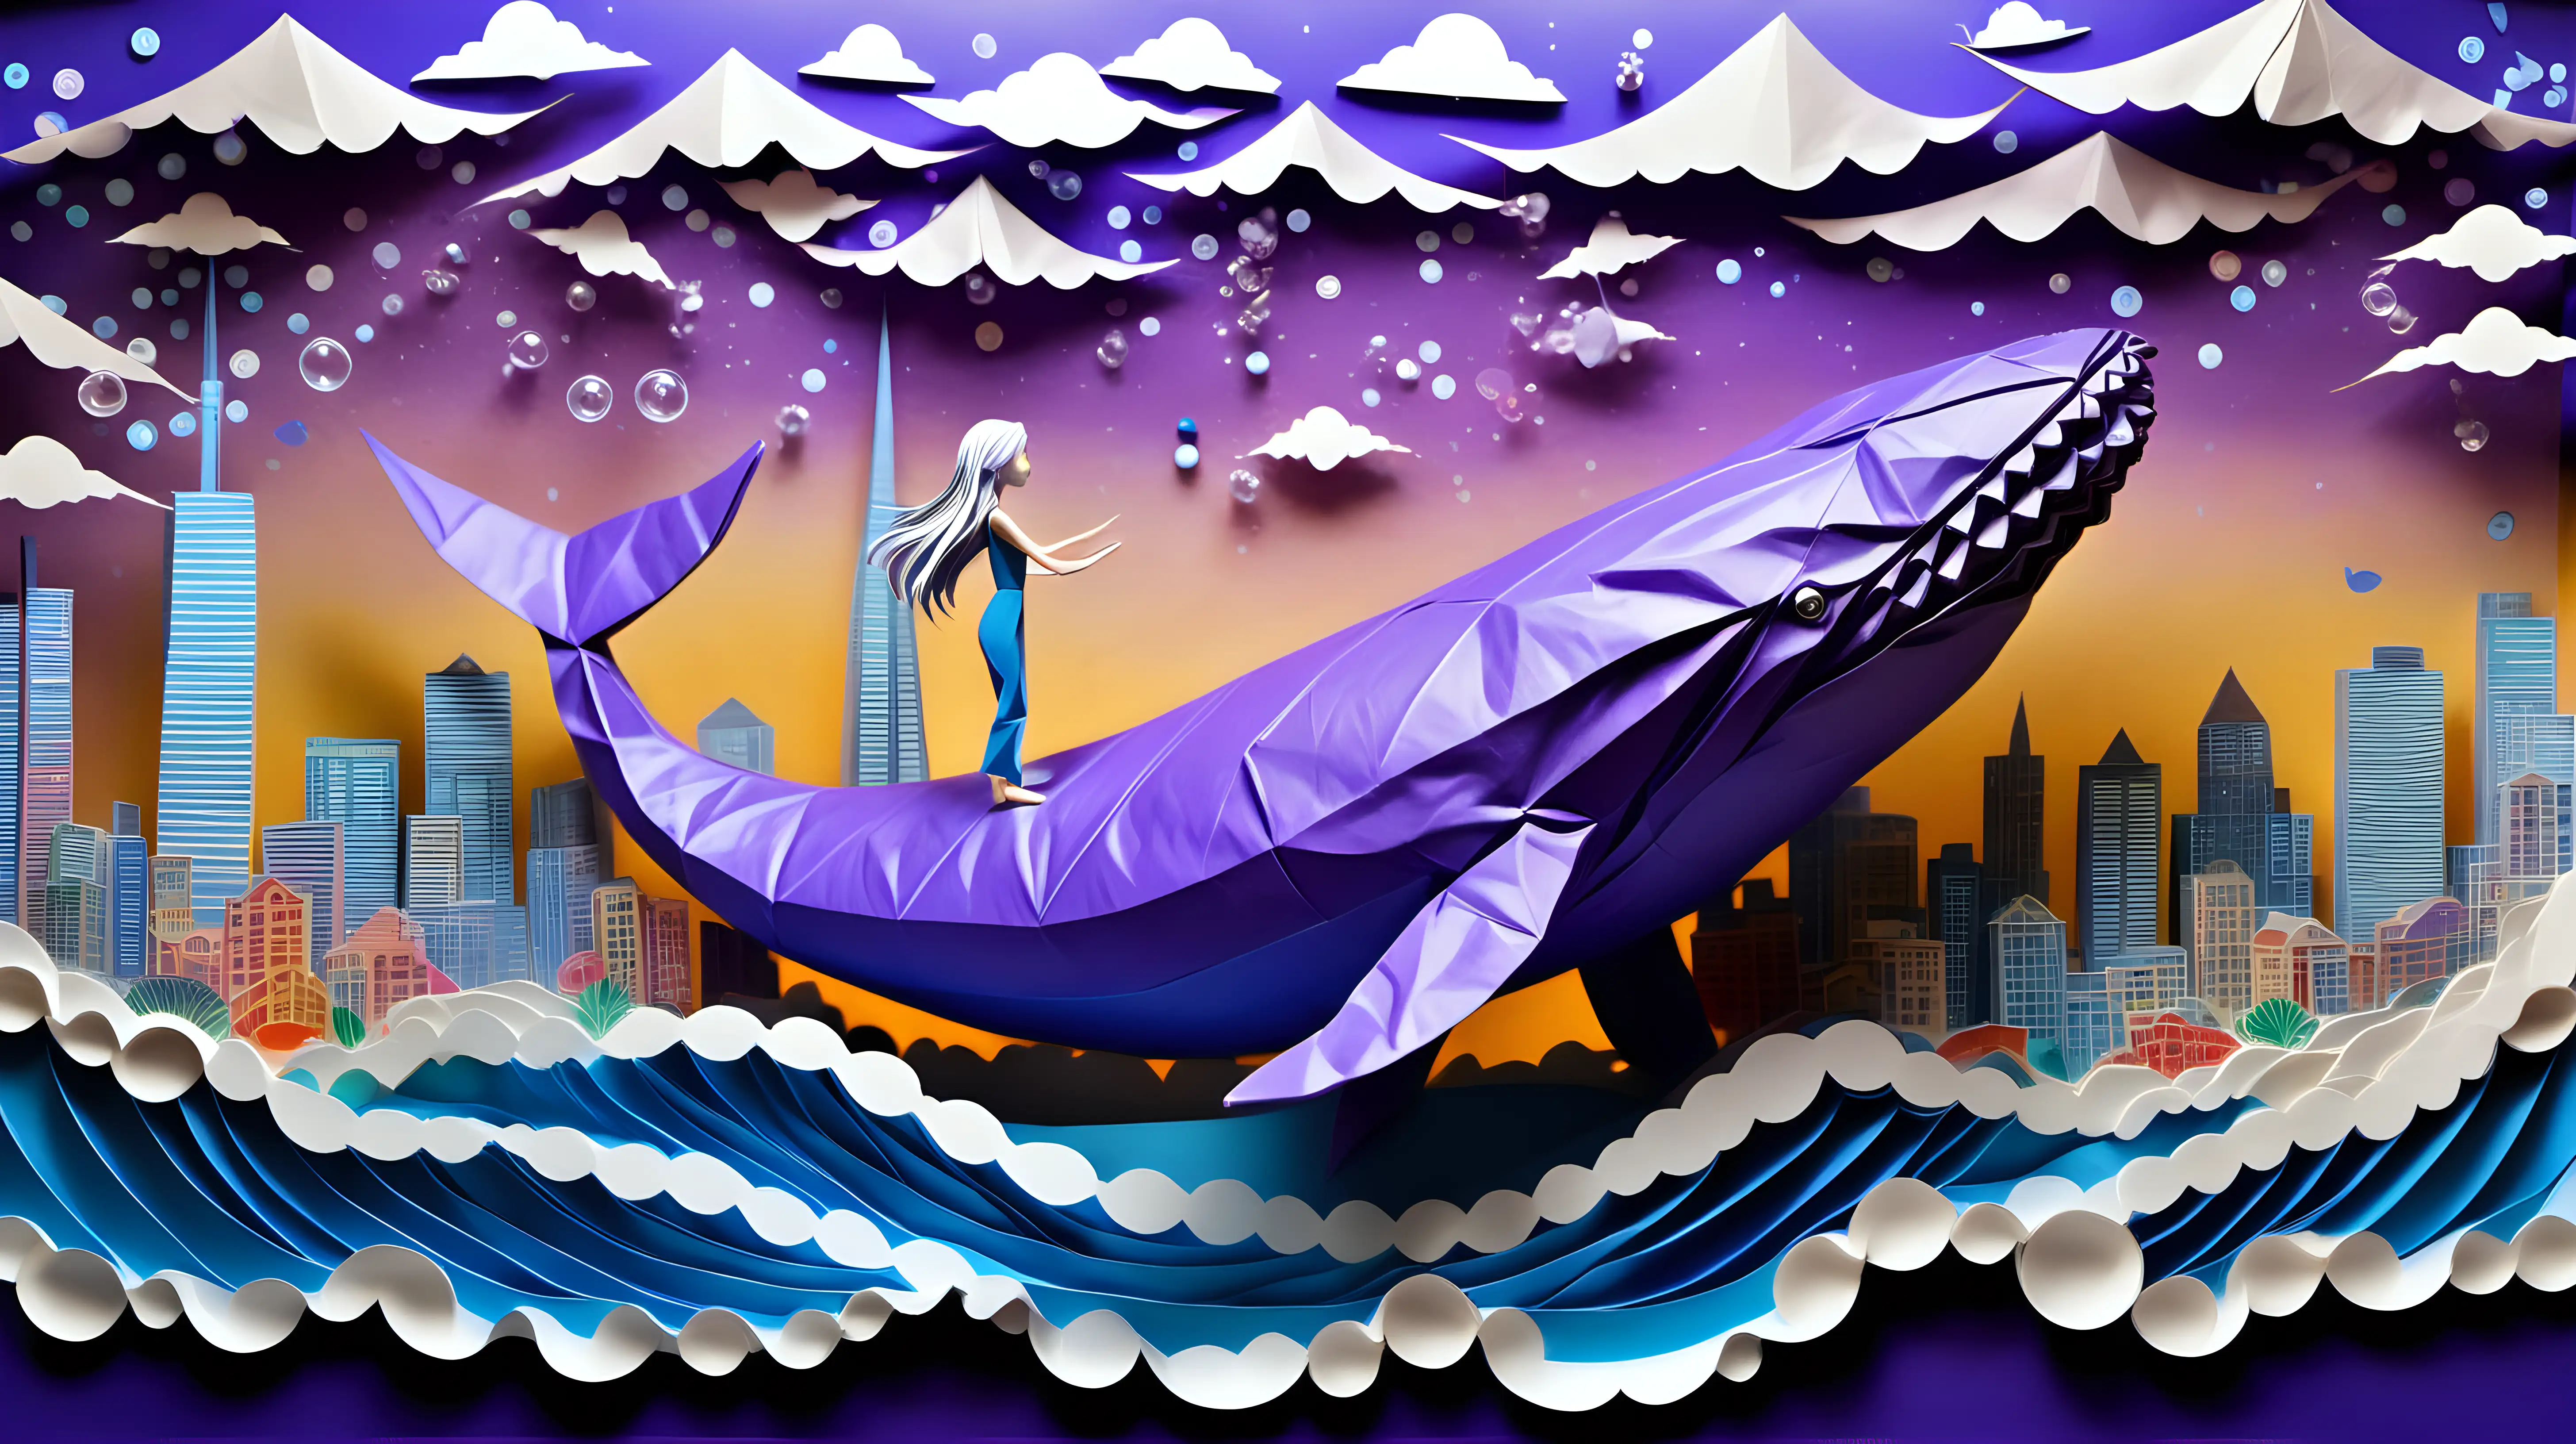 Abstract art paper art origami DIORAMA, ghibli inspired painting of a beautiful enchanting silver-haired, blue-eyed, 18 YEAR OLD GIRL, playing with a big purple whale in tokyo skyline, with clouds like waves and bubbles and sunshine